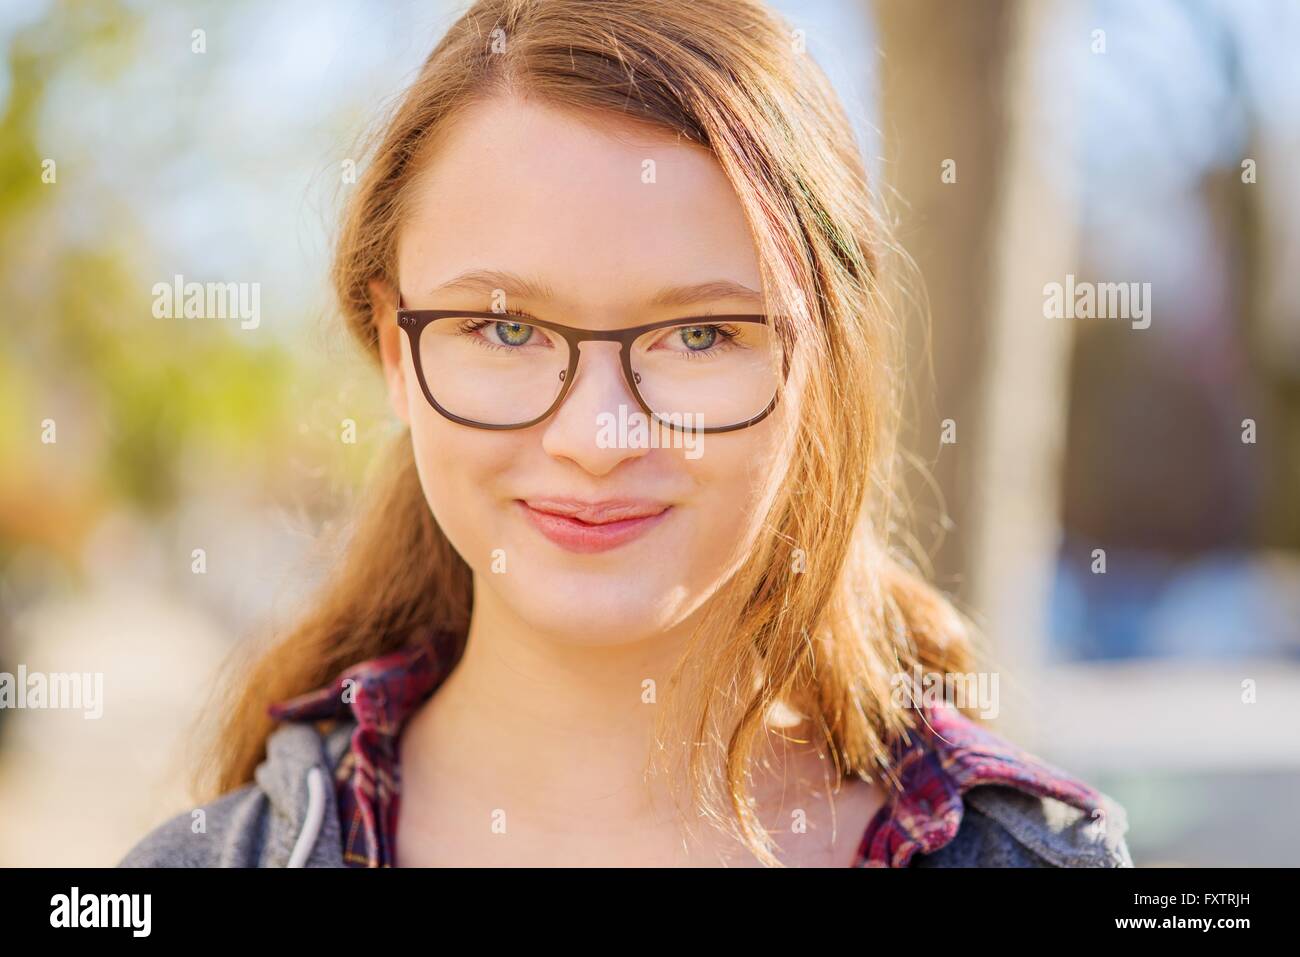 Portrait of teenage girl, smiling, close-up Stock Photo